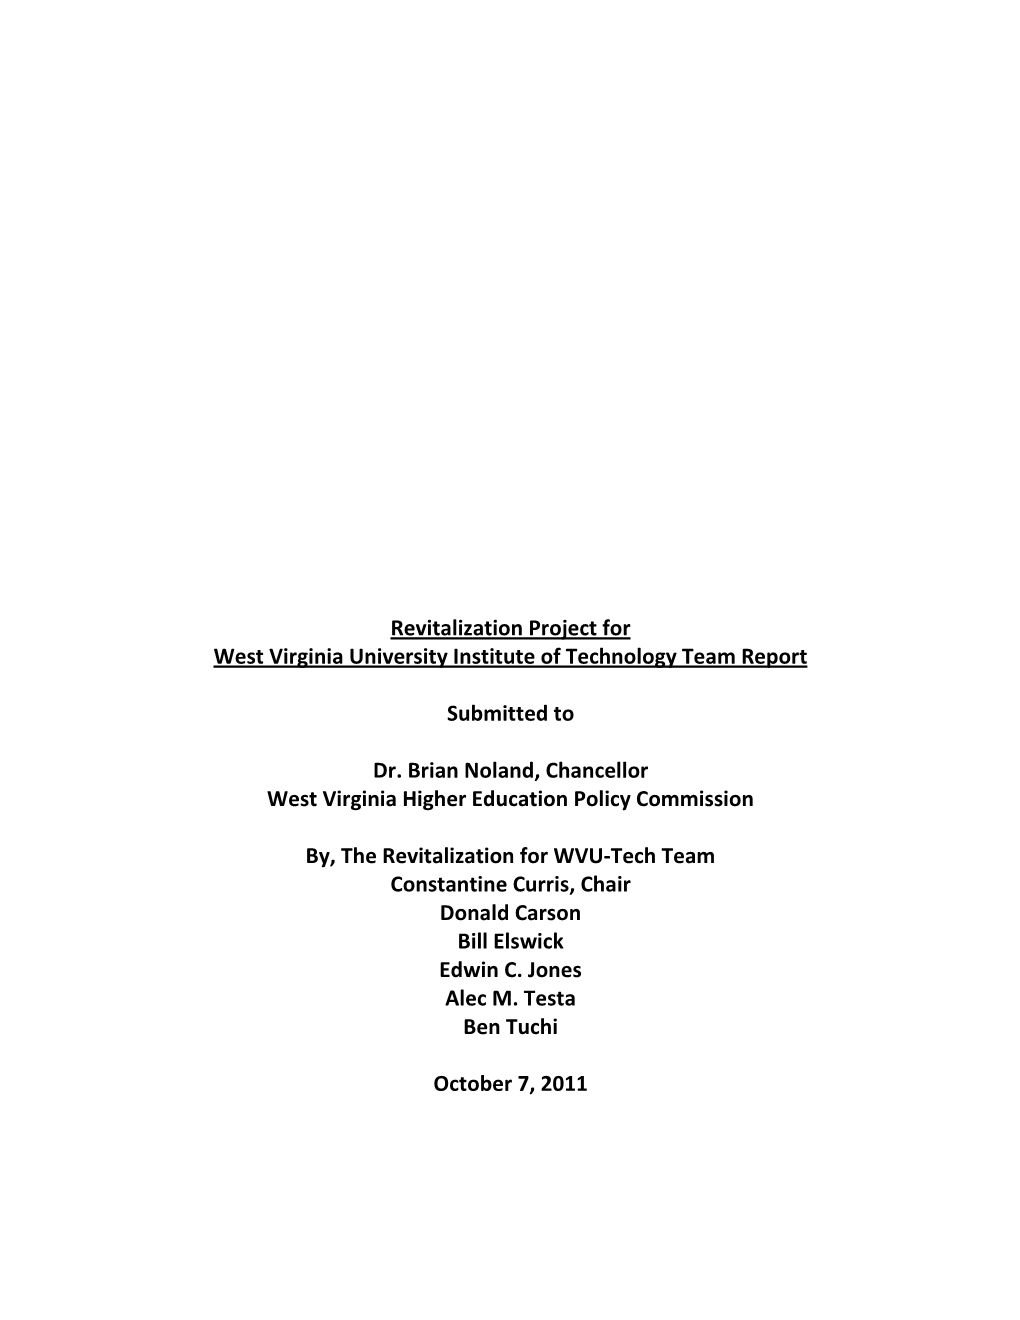 Revitalization Project for West Virginia University Institute of Technology Team Report